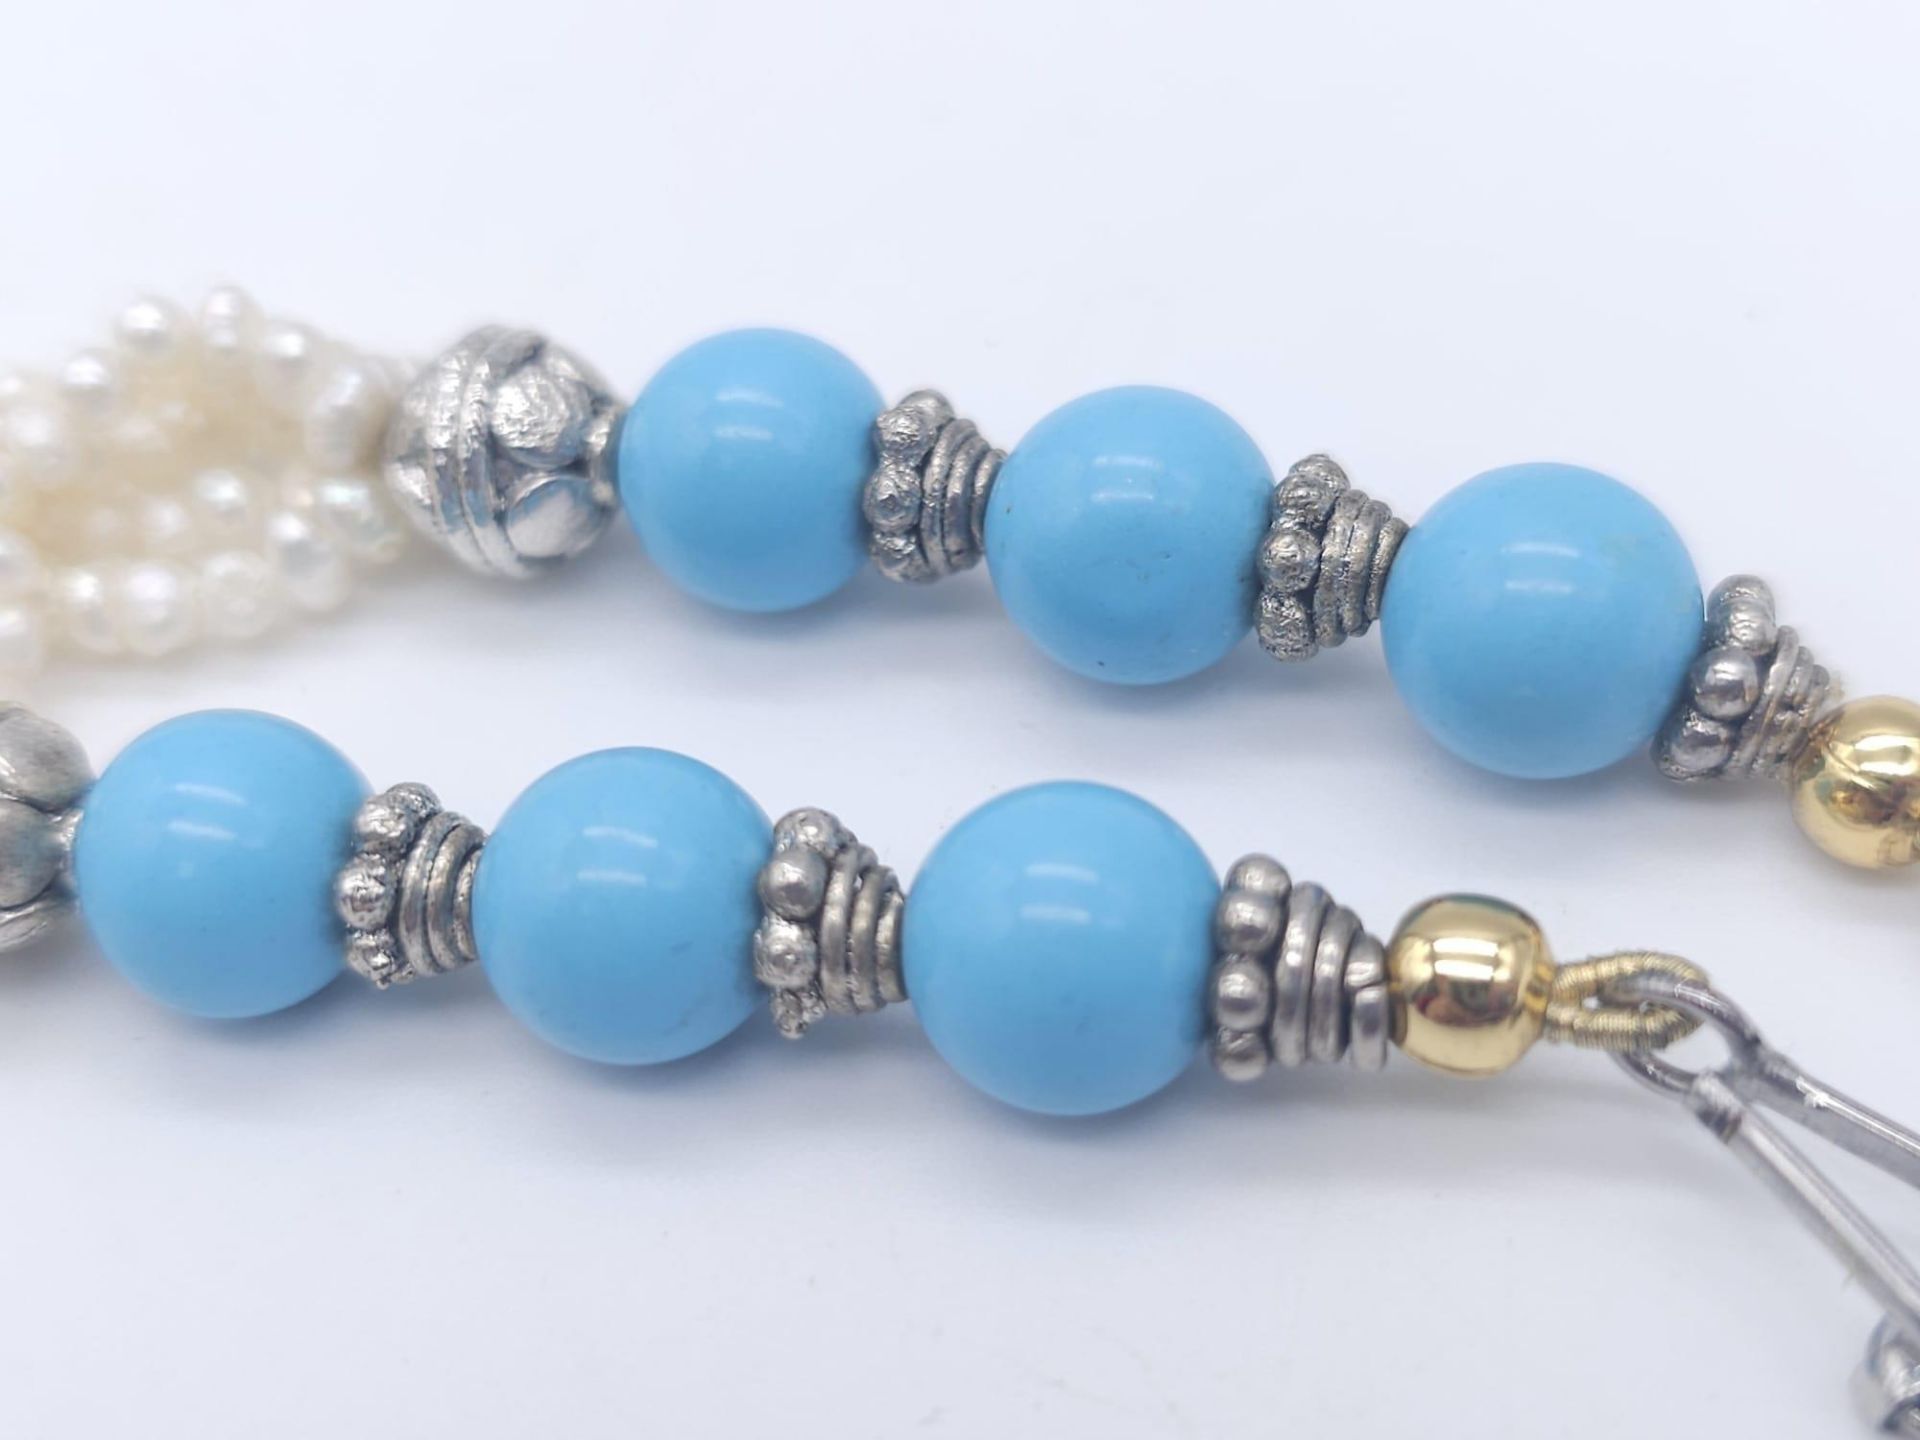 A Vintage Chalcedony and Four Strand Seed Pearl Necklace. With an art deco style drop pendant. - Image 6 of 7